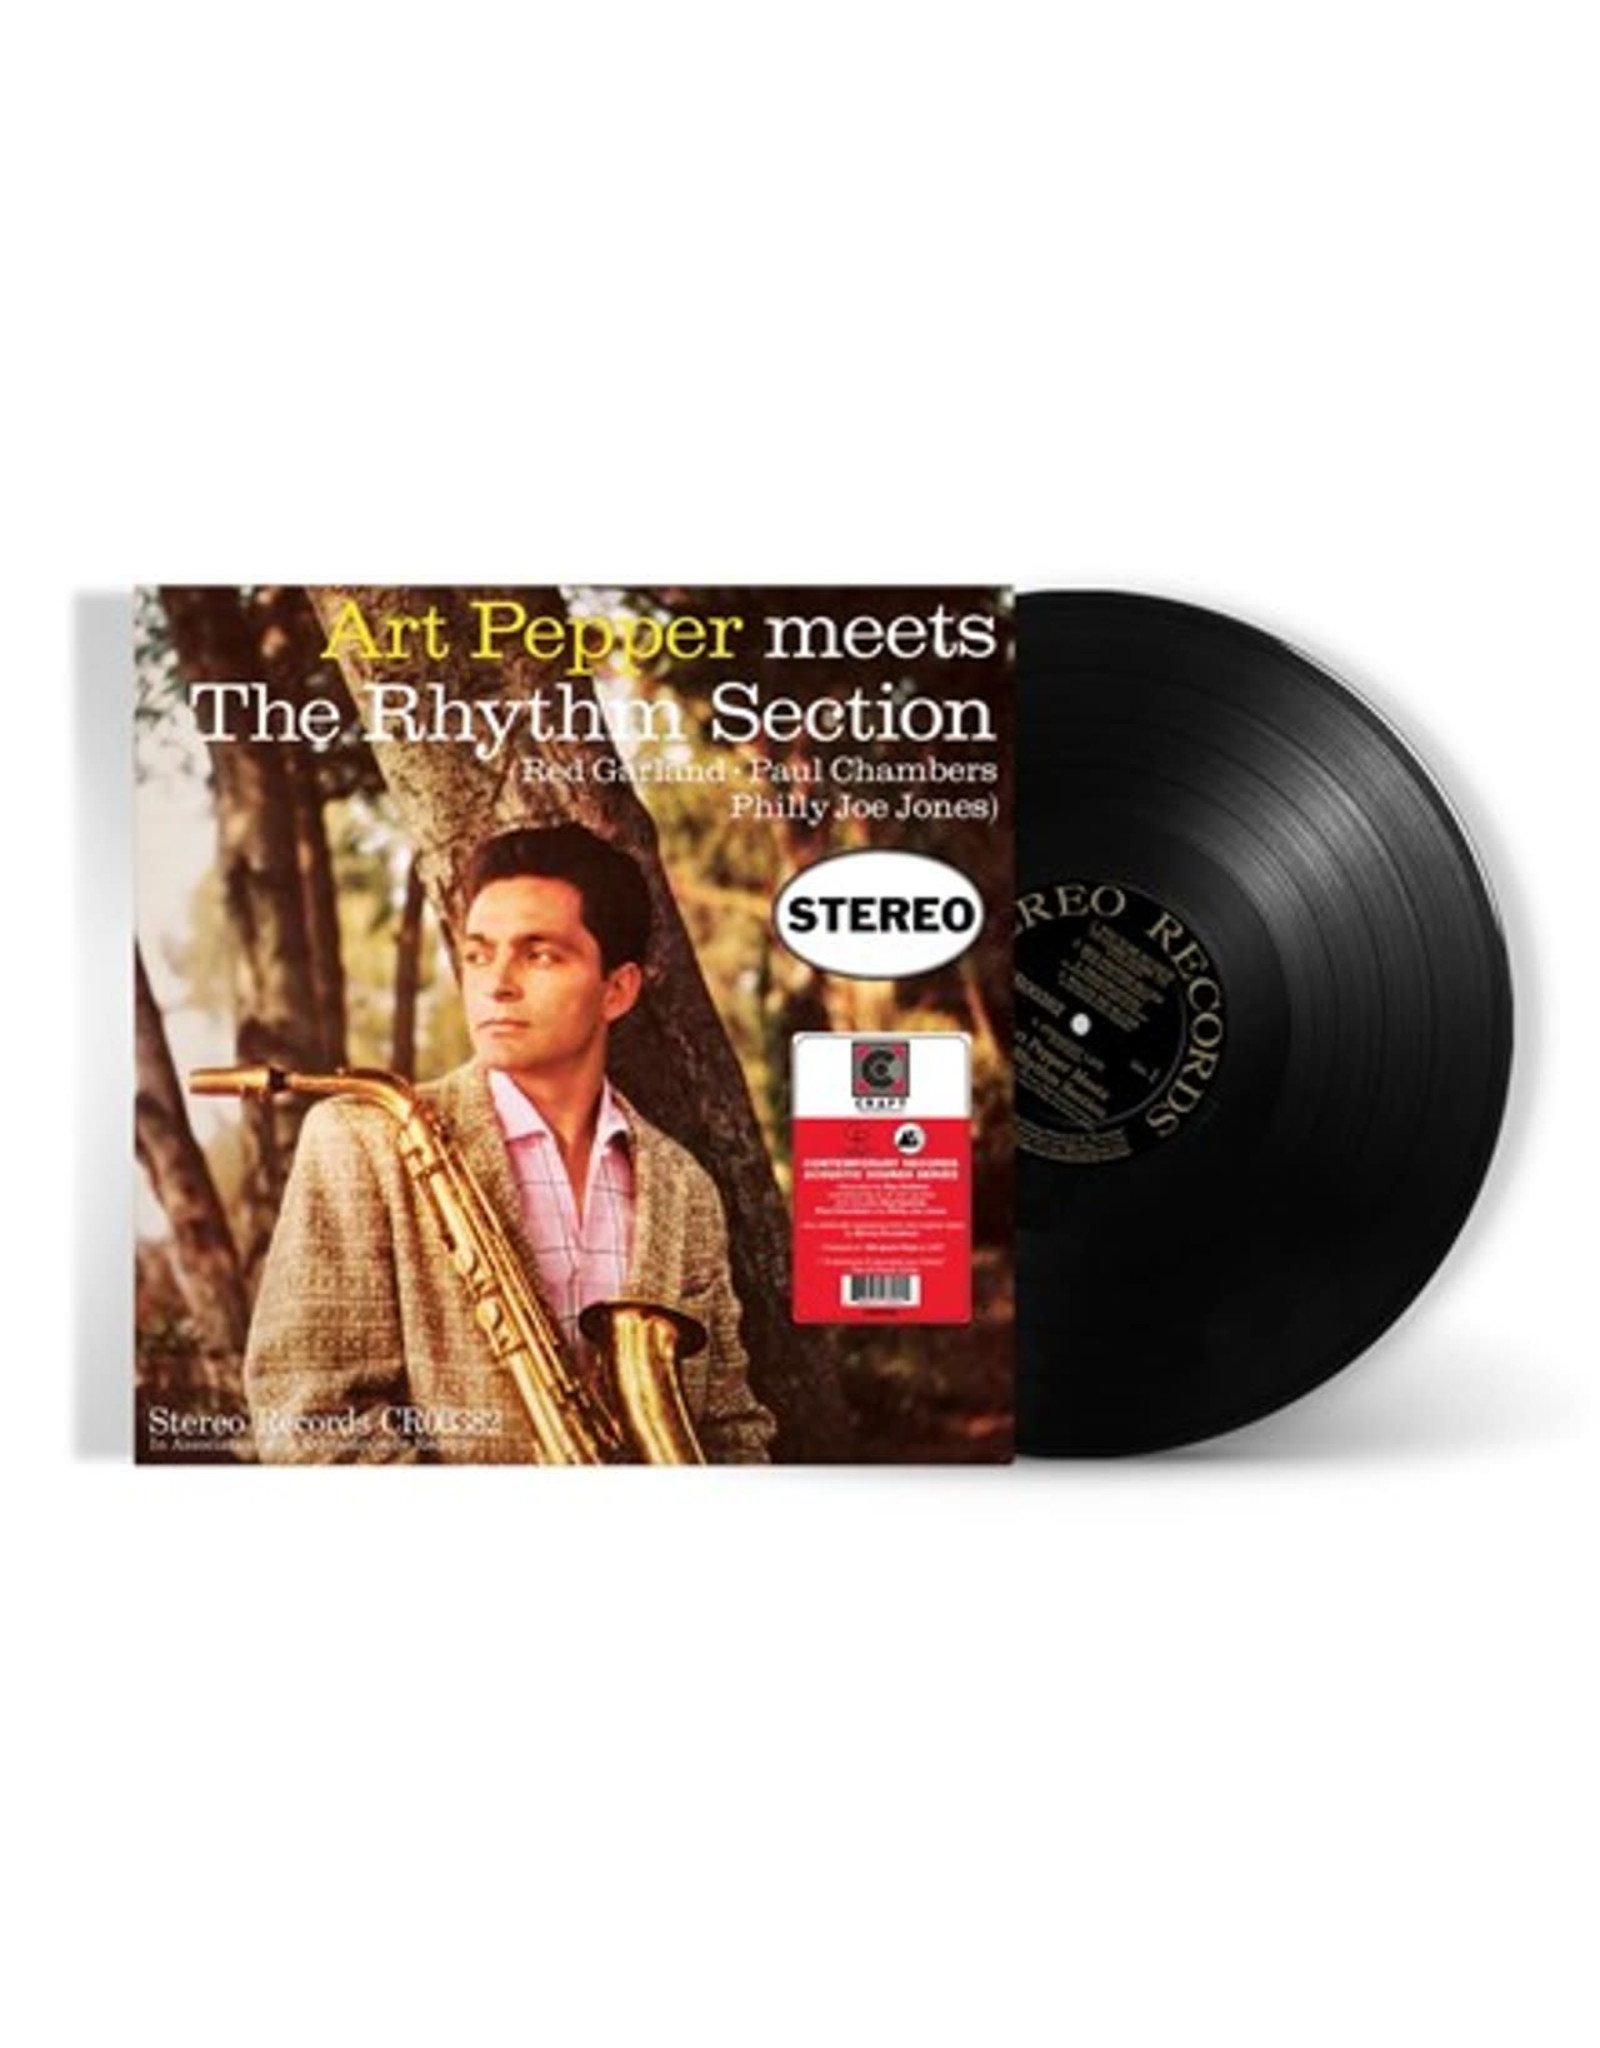 Craft Pepper, Art: Meets The Rhythm Section (Contemporary Records Acoustic Sounds Series) LP